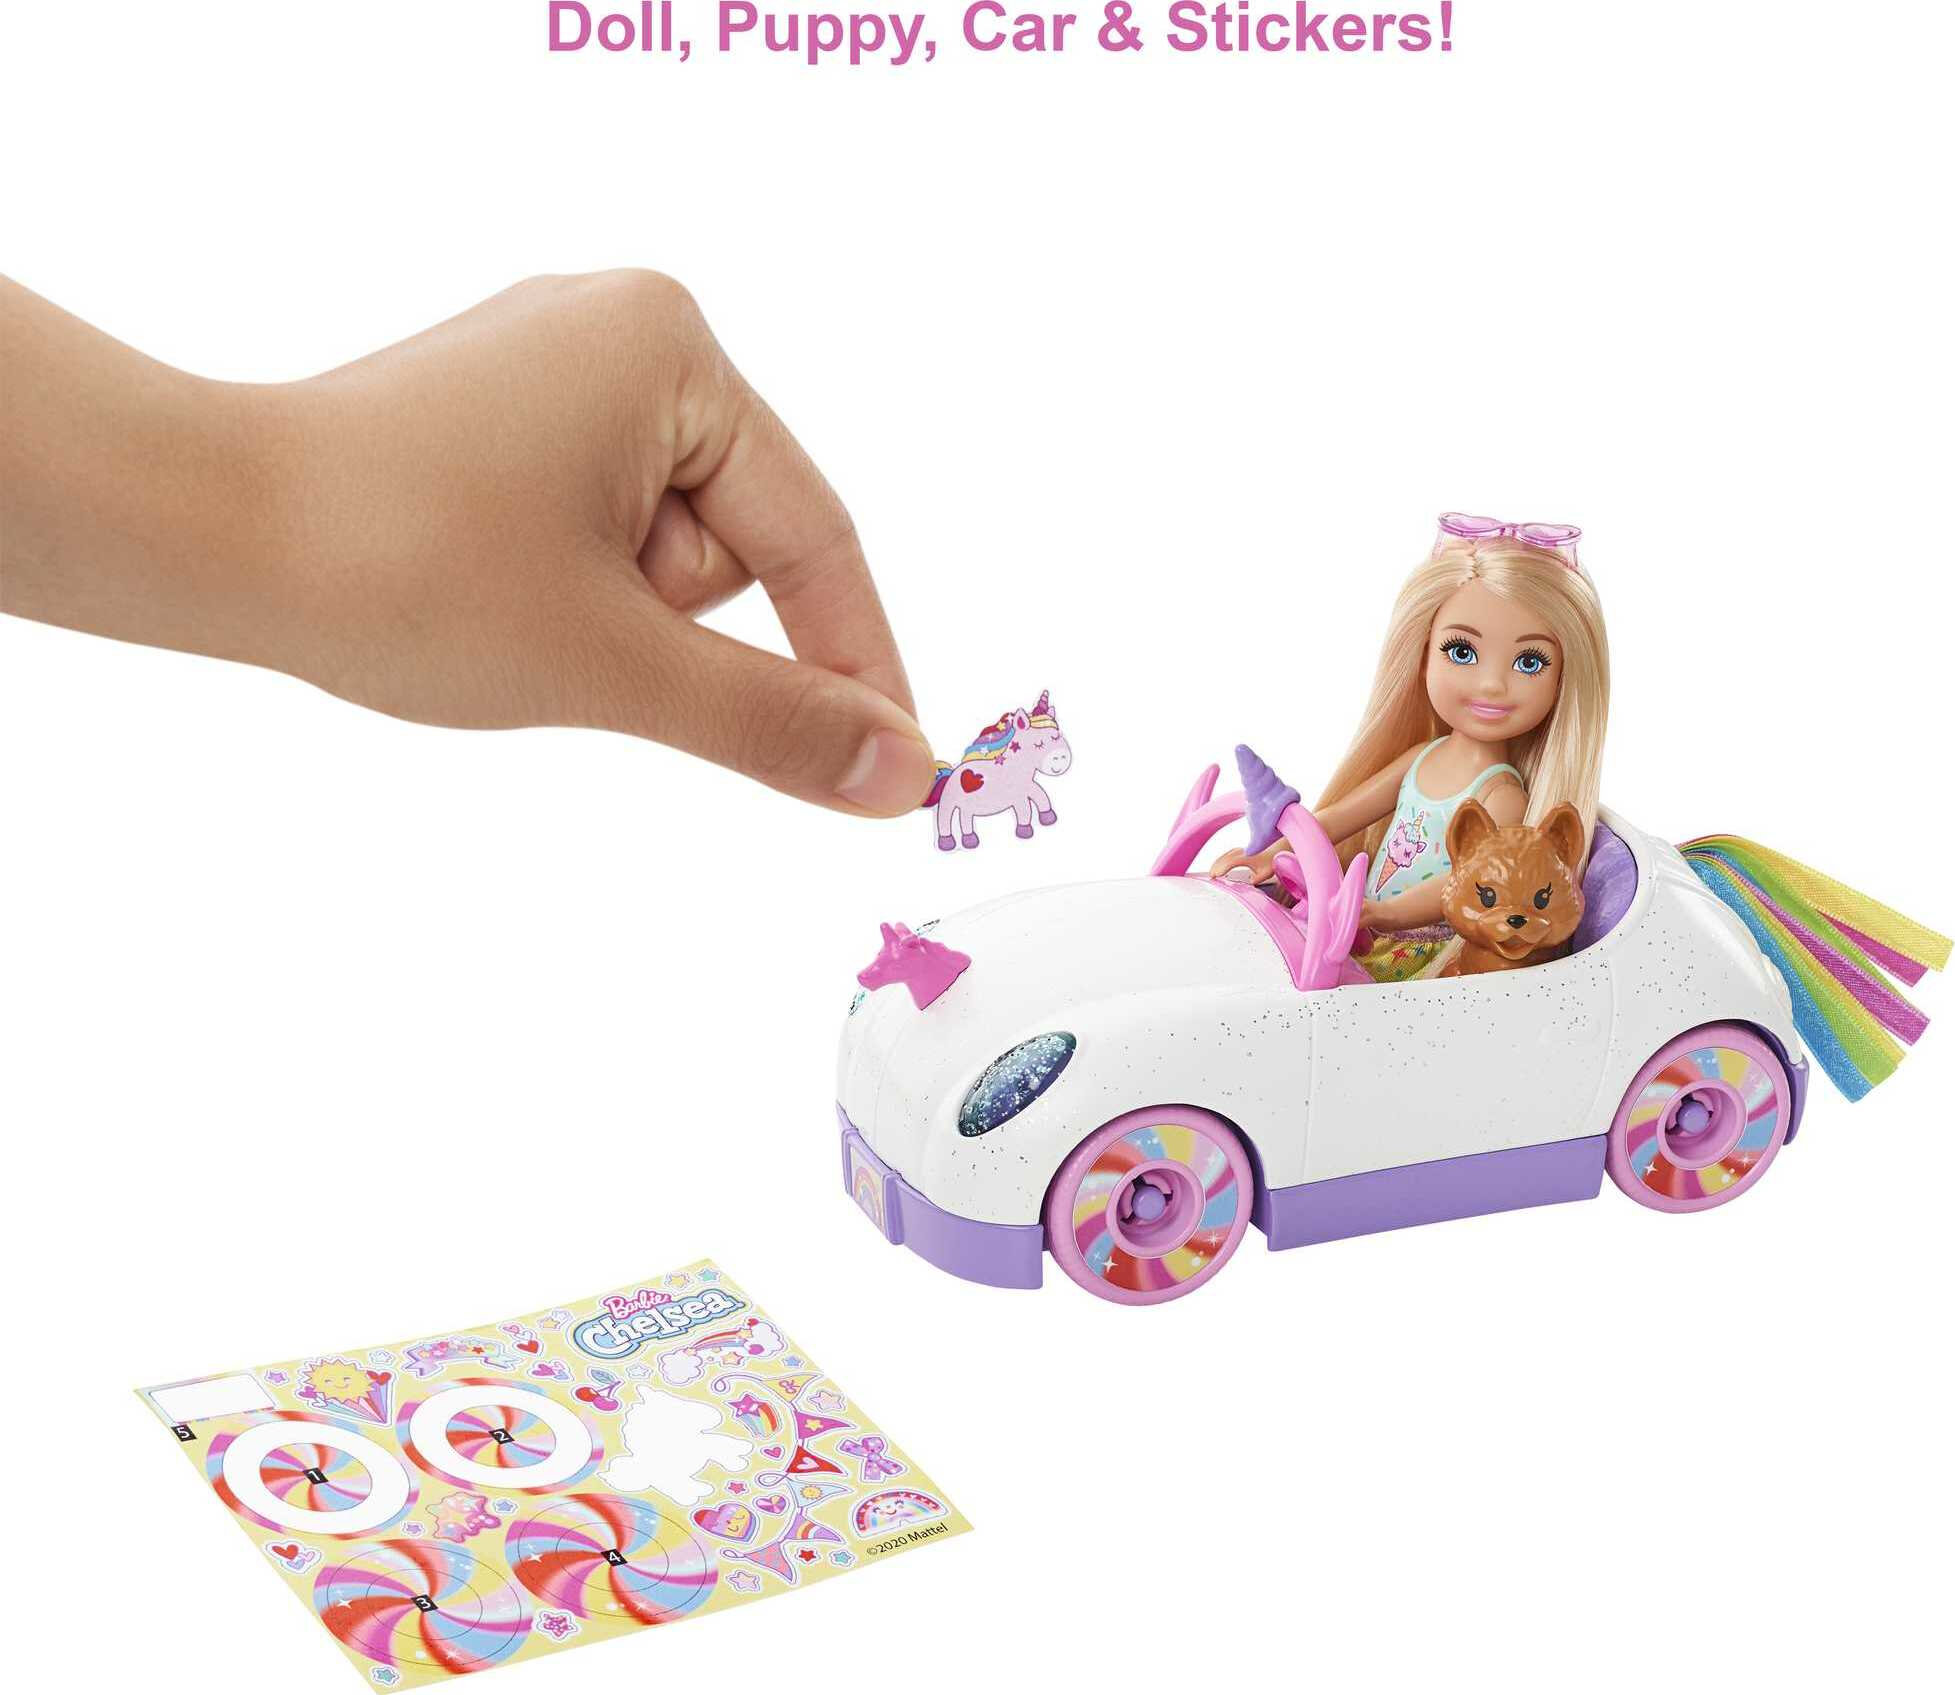 Barbie Club Chelsea Doll & Toy Car, Unicorn Theme, Blonde Small Doll, Puppy, Stickers & Accessories - image 3 of 6